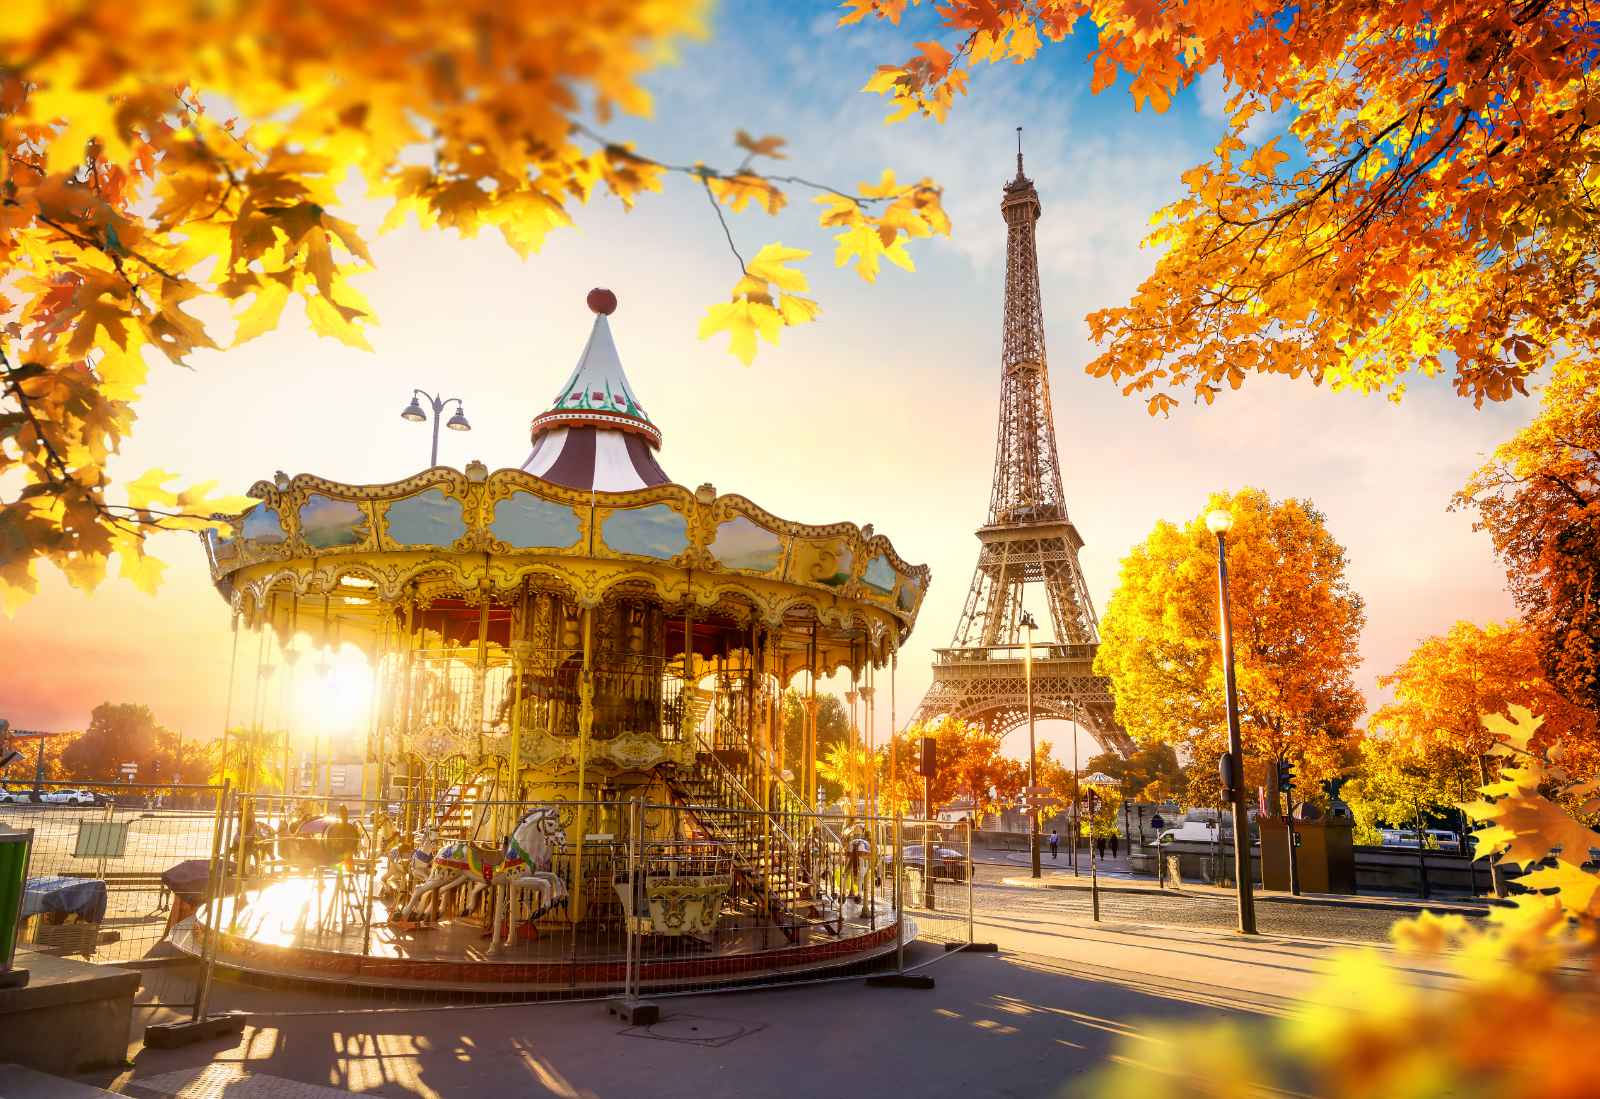 Ultimate One Day in Paris Itinerary - How to See Paris in a Day